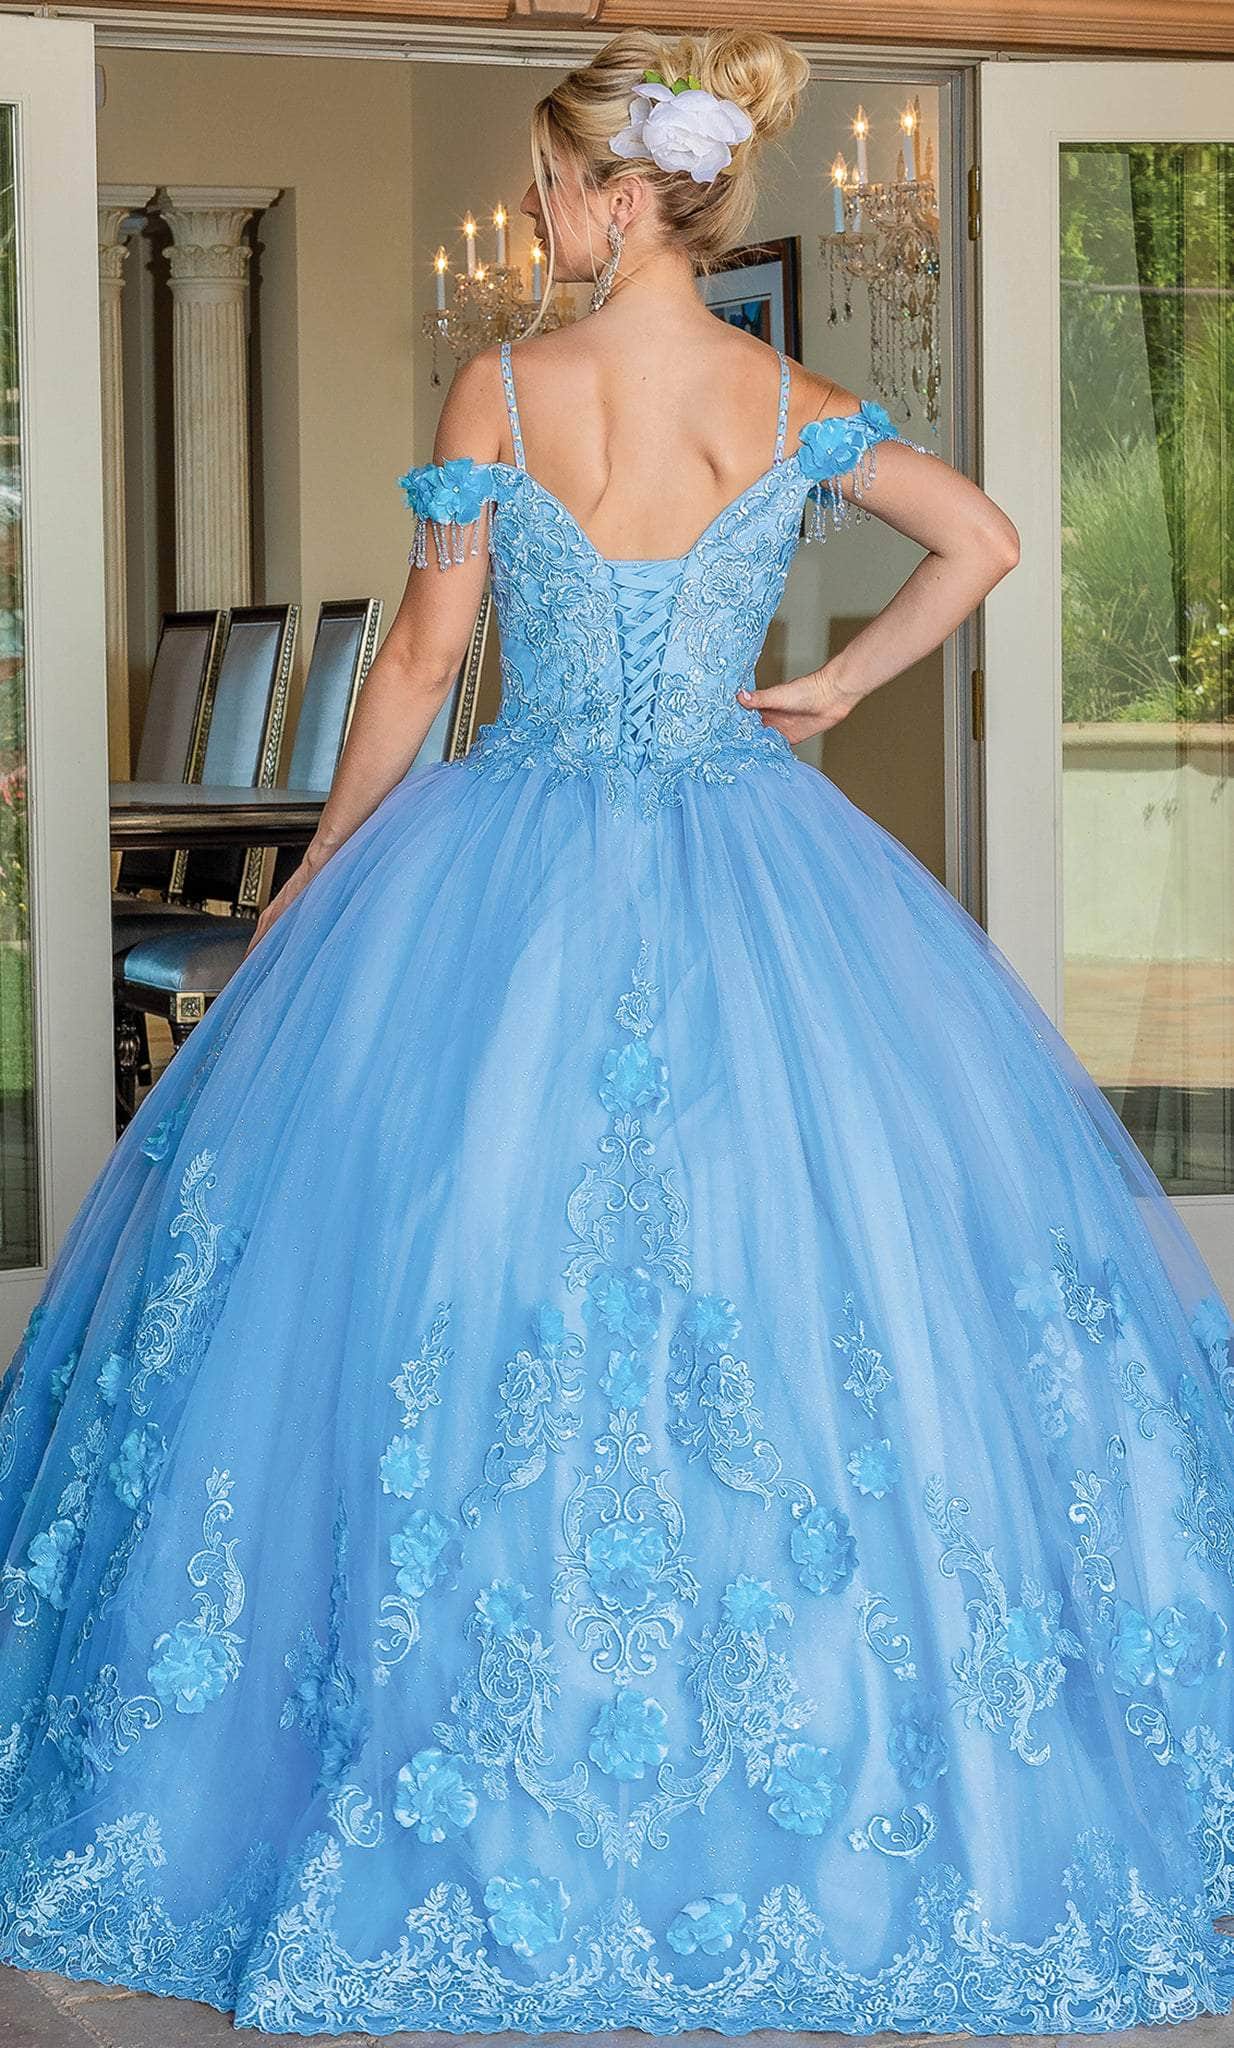 Dancing Queen 1706 - Bead Fringed Quinceanera Ballgown Ball Gowns